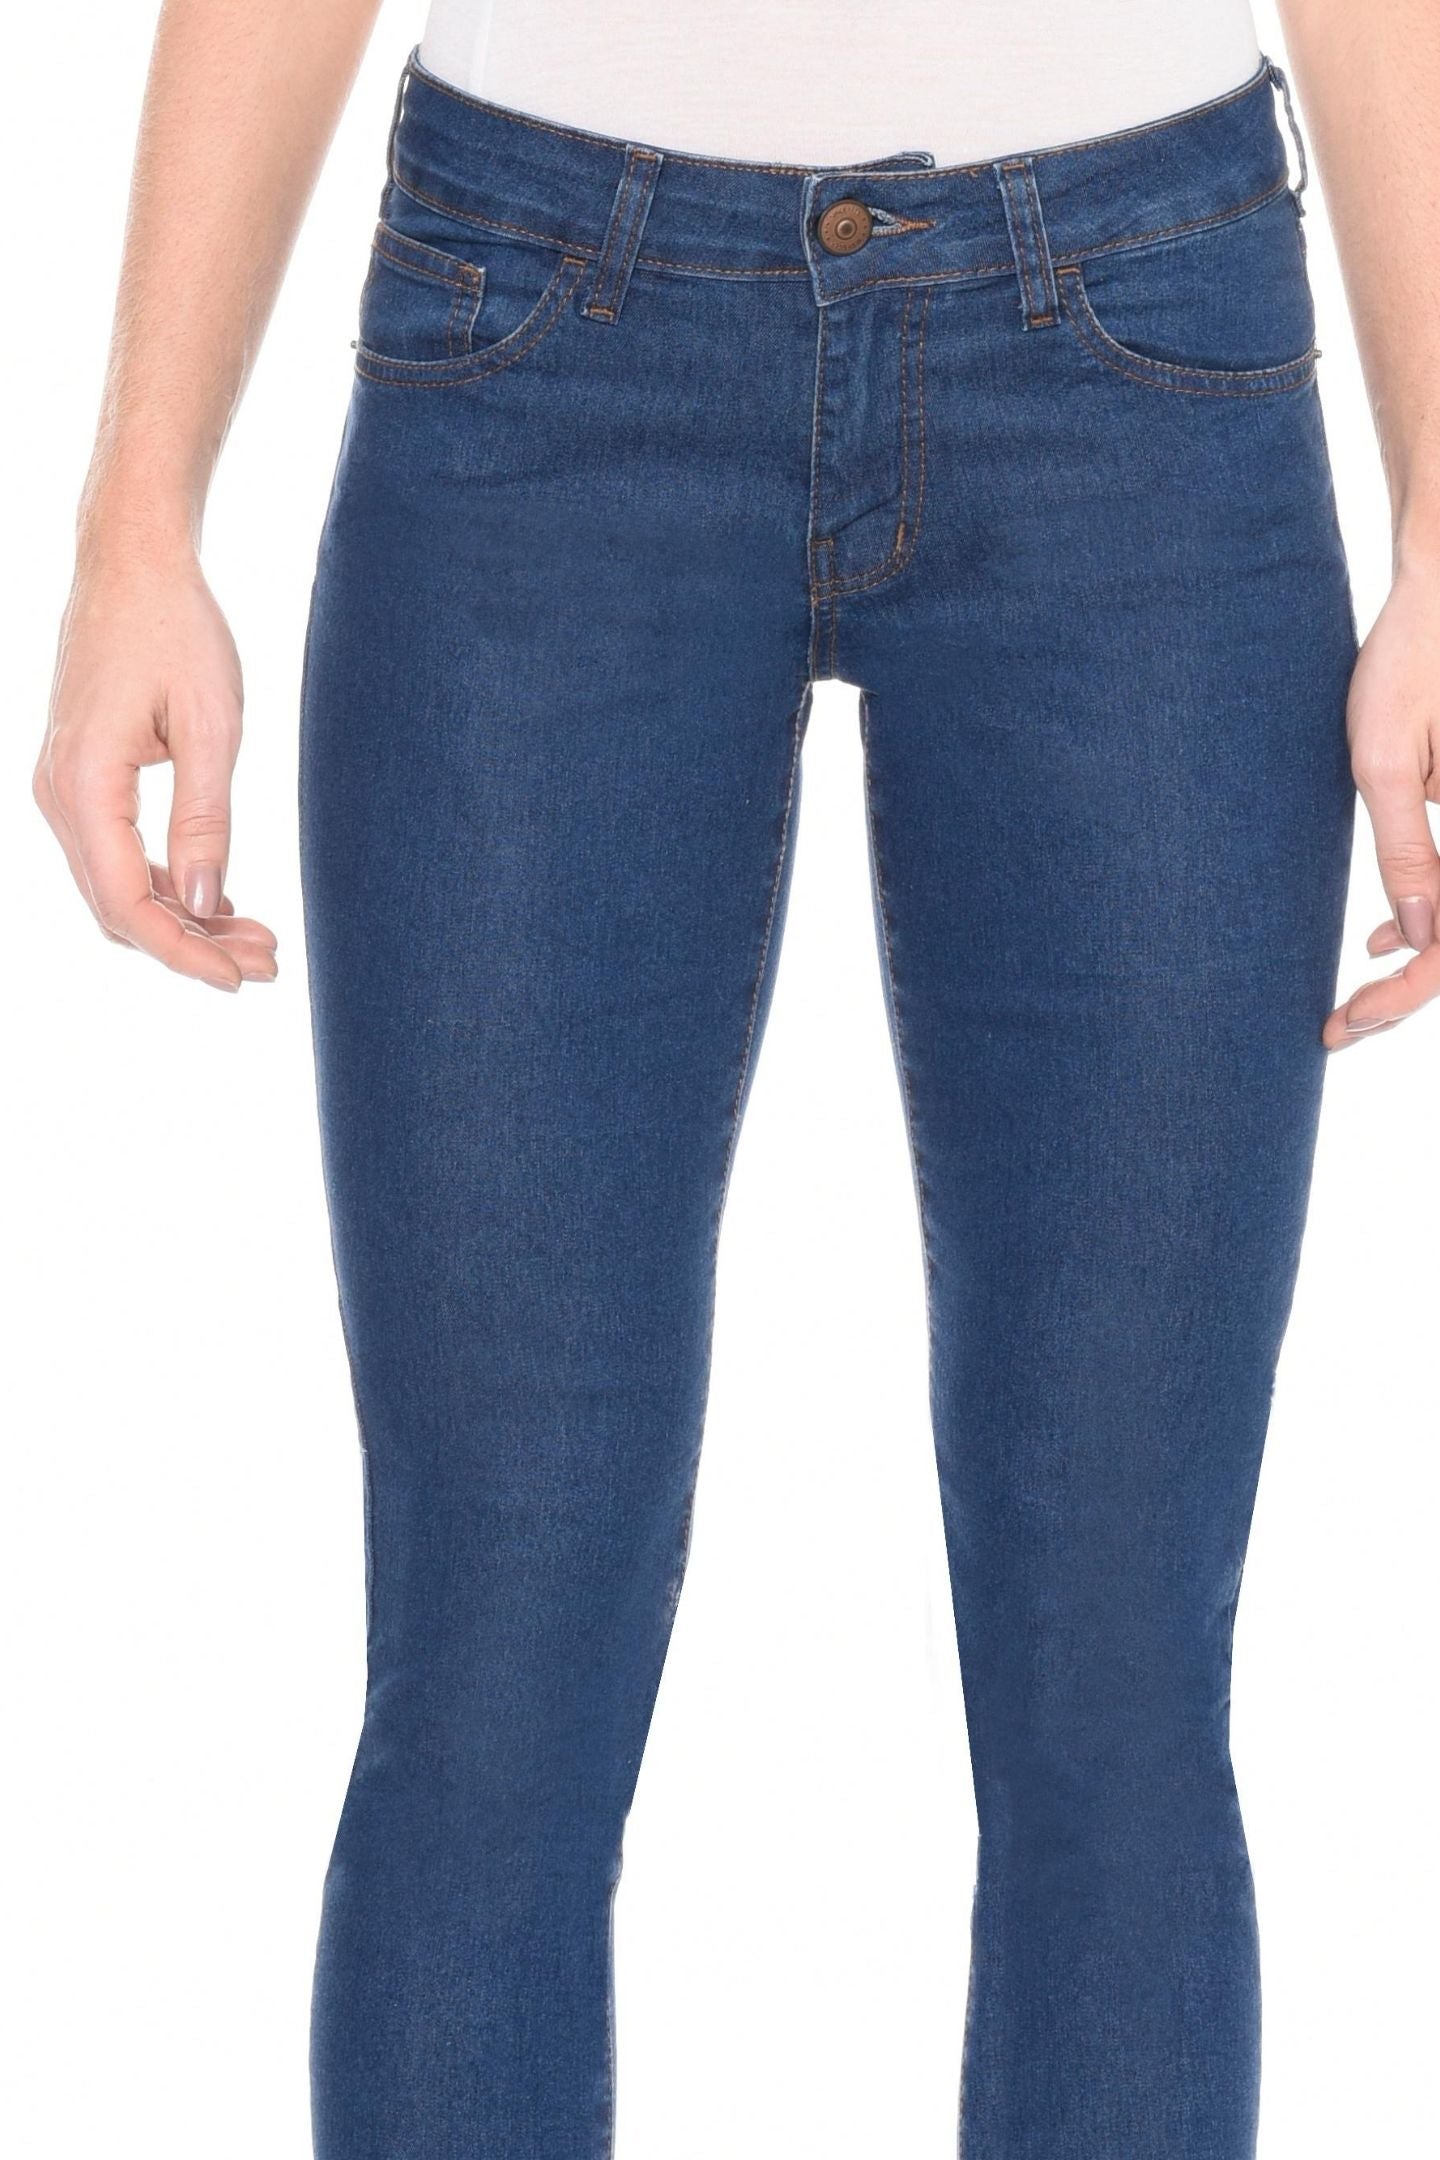 jeans extreme skinny